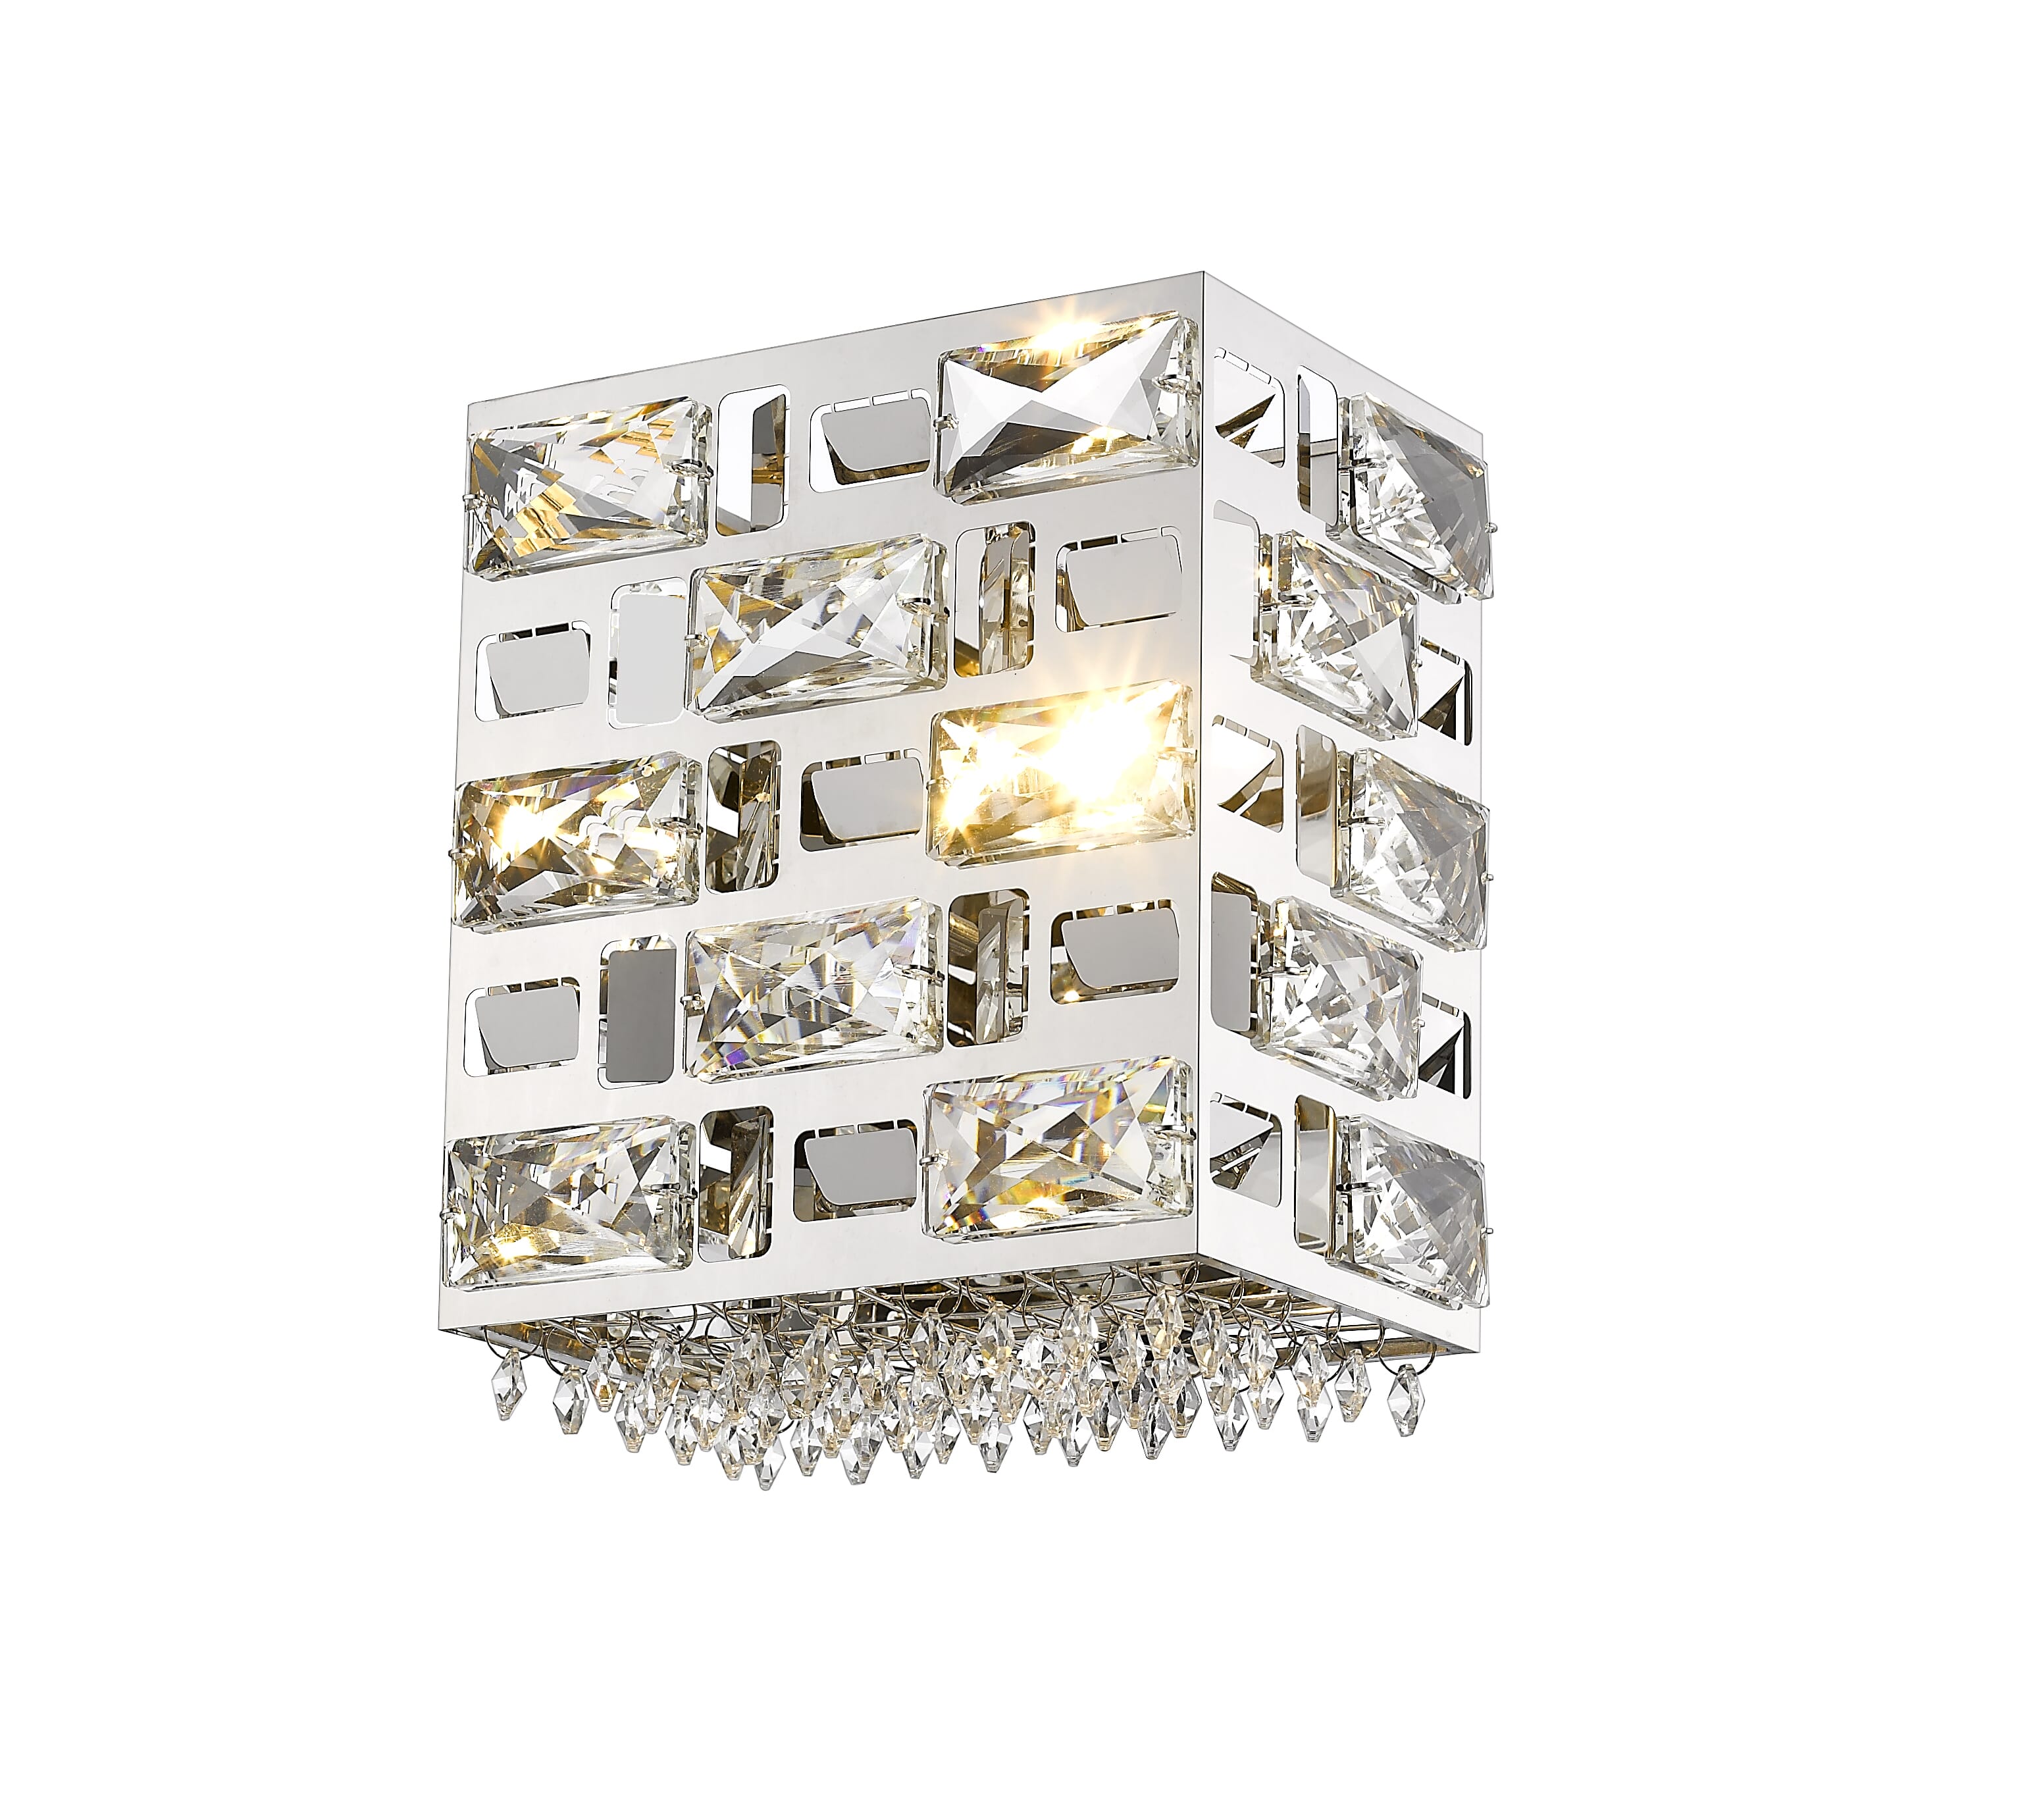 Aludra 1-Light Wall Sconce In Chrome